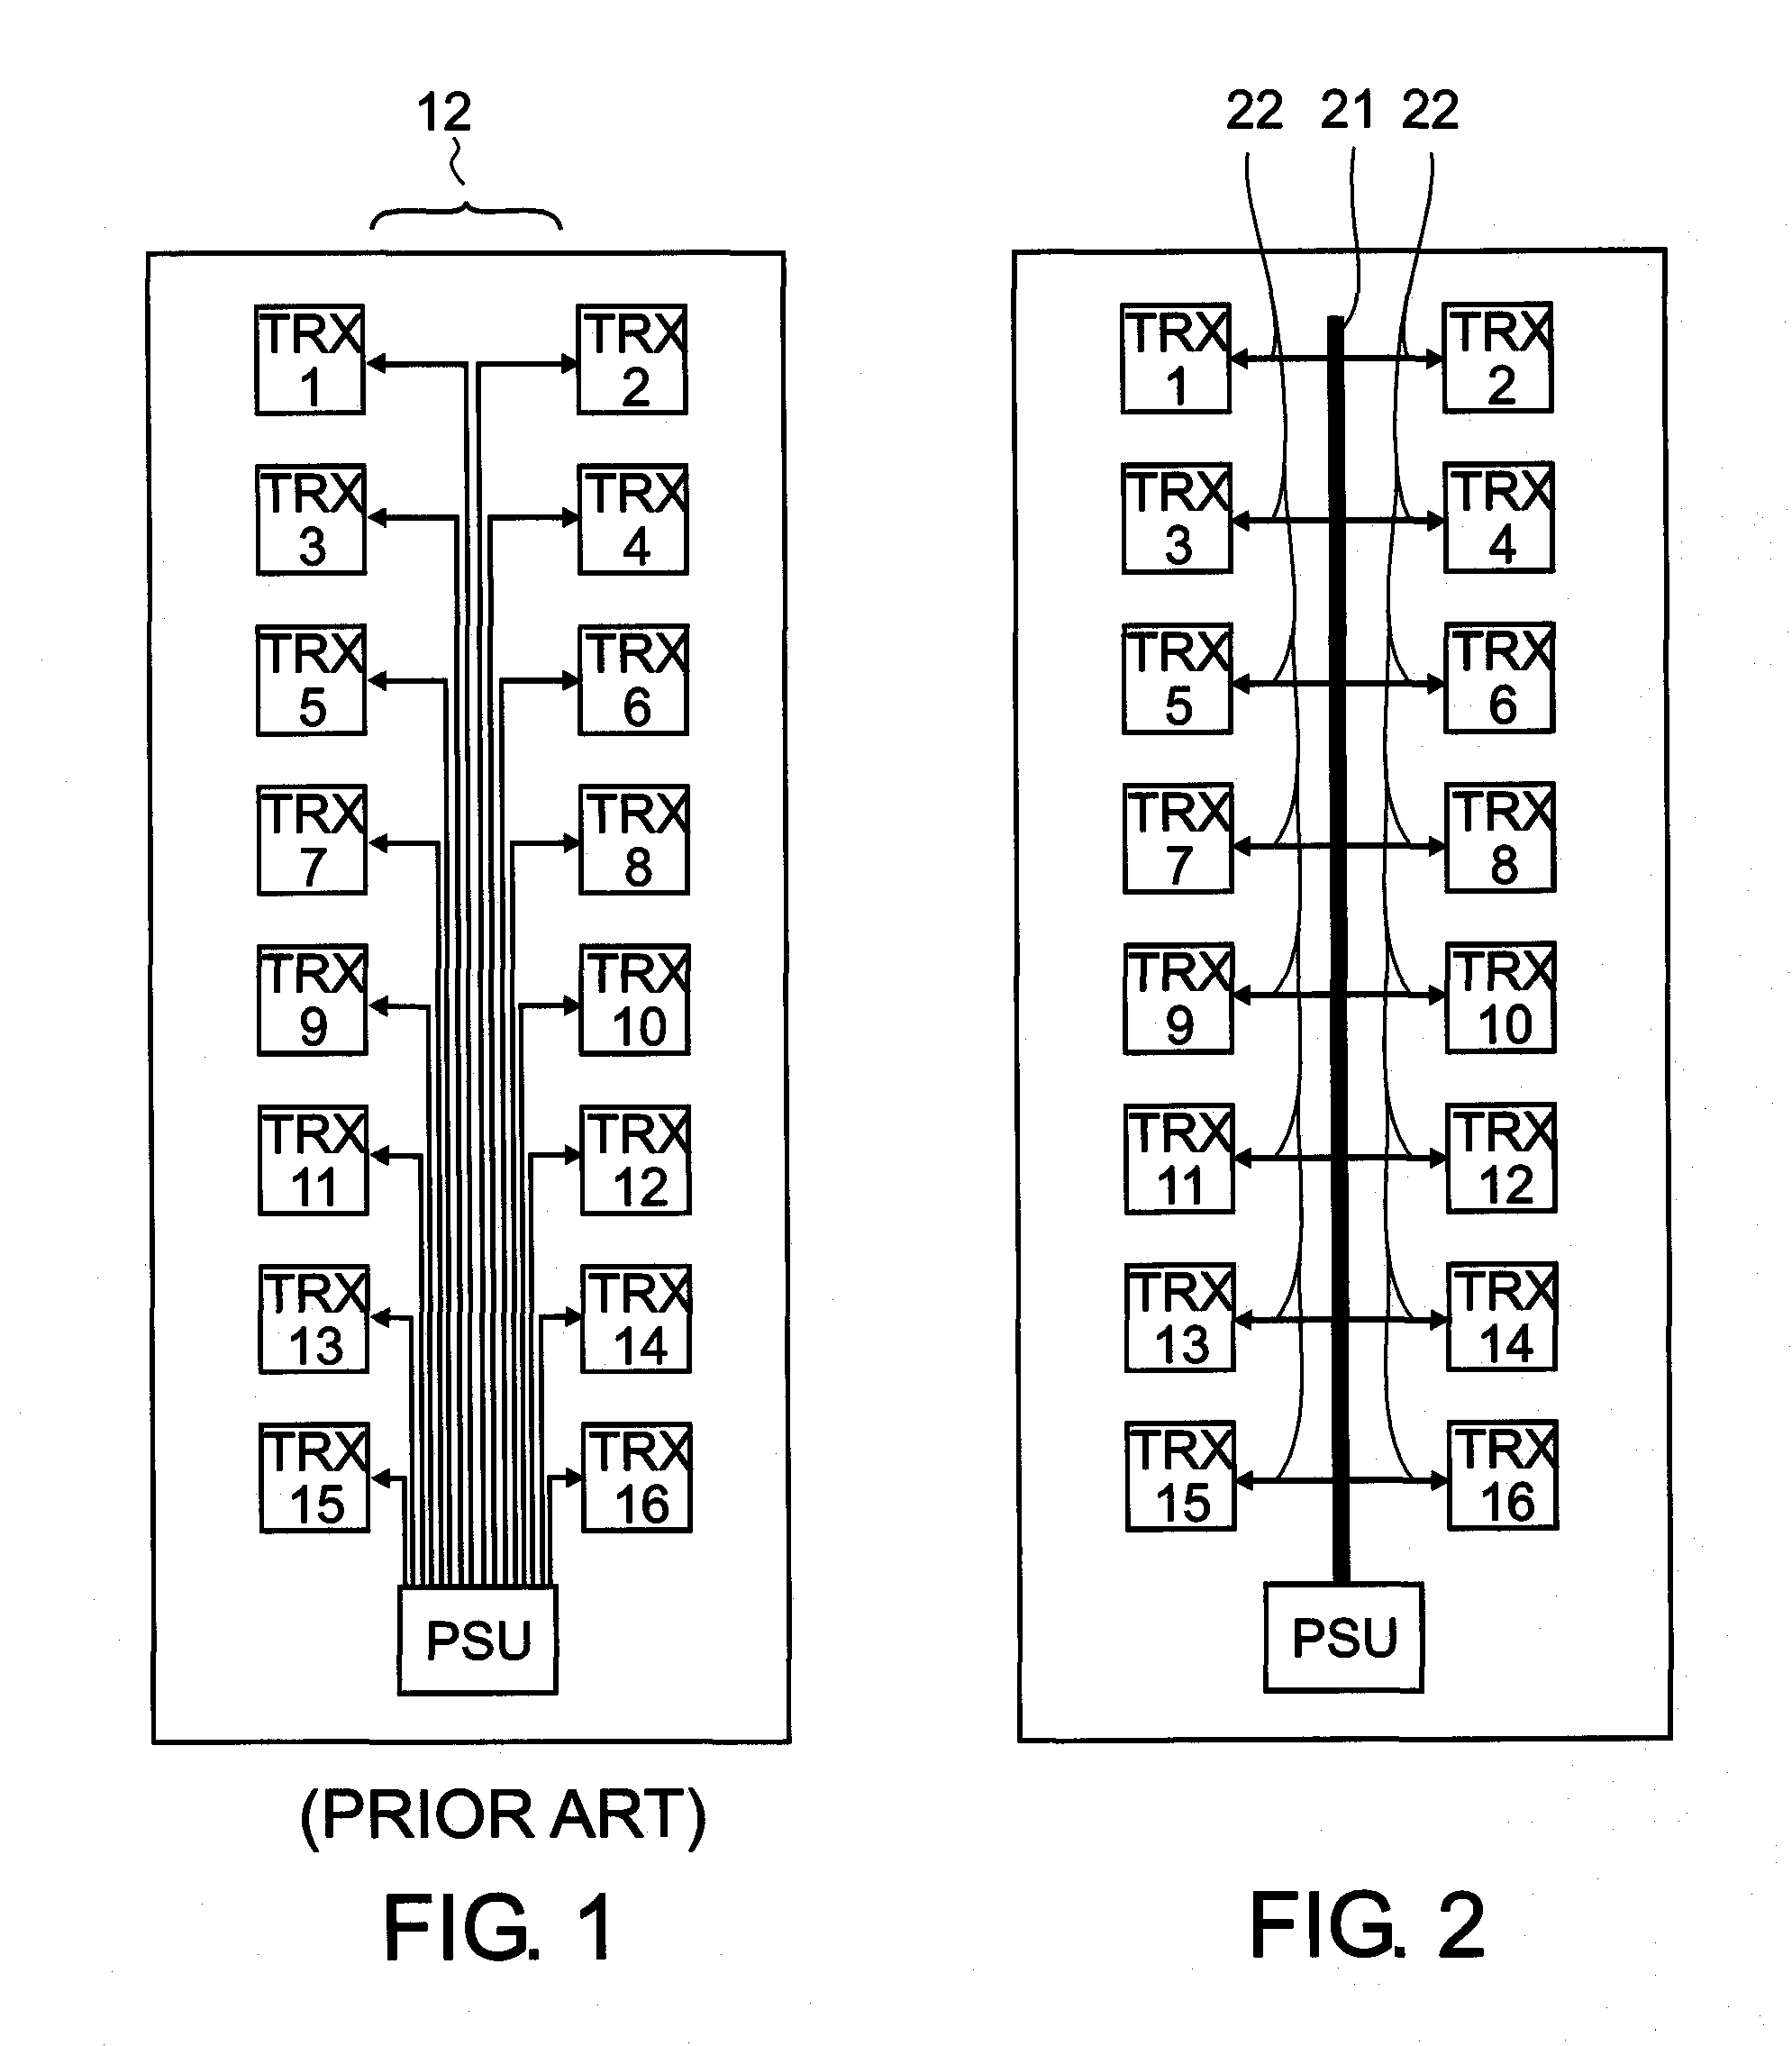 Bus bar power distribution for an antenna embedded radio system